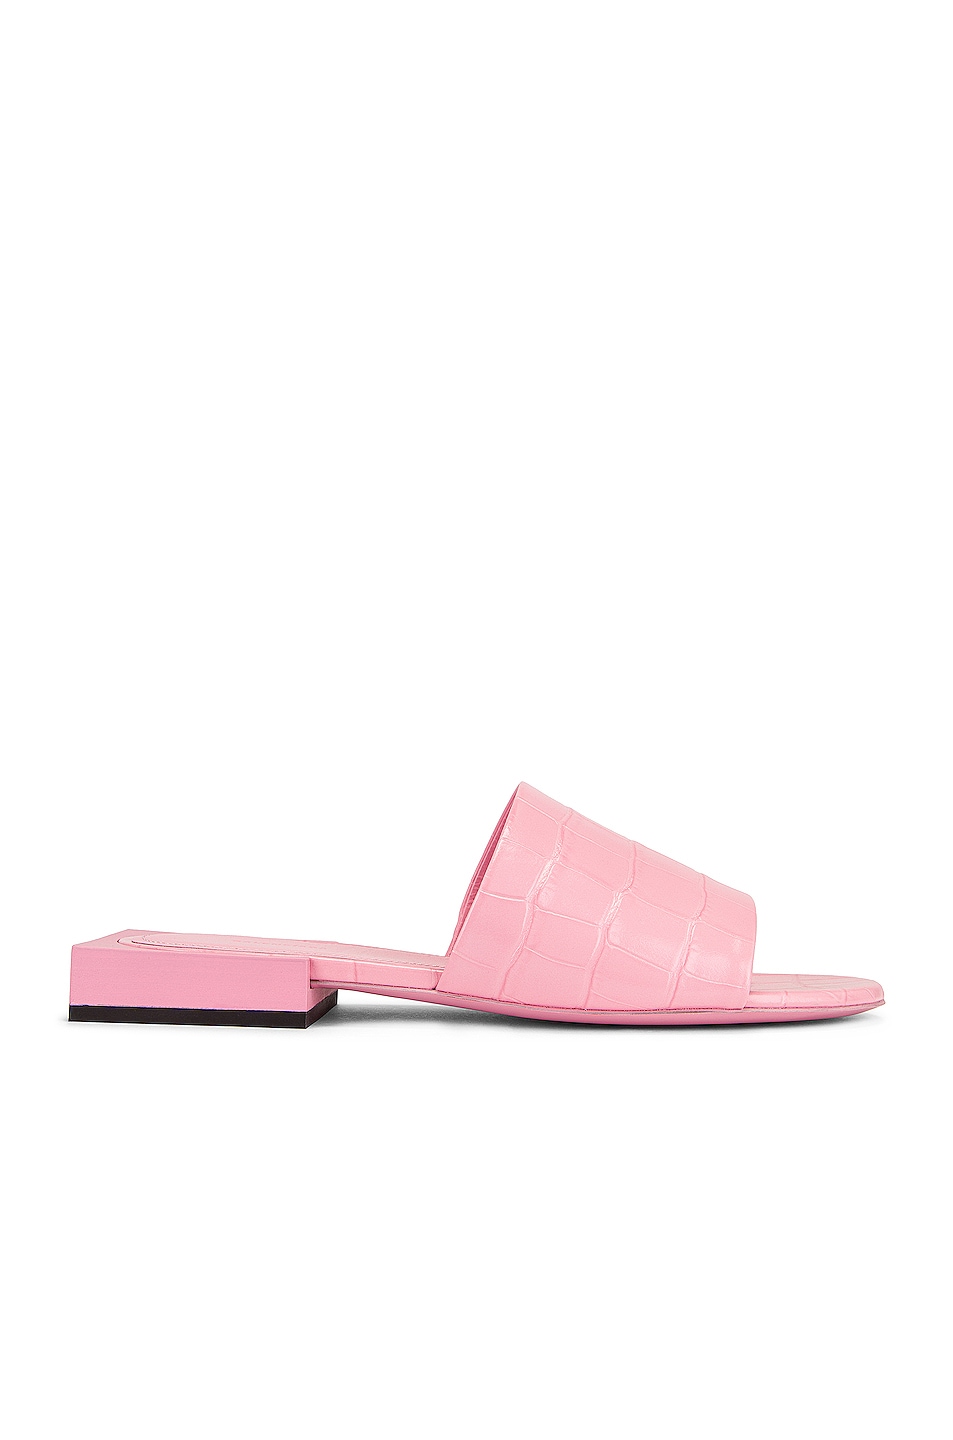 Image 1 of Balenciaga Box Sandals in Candy Pink & Black